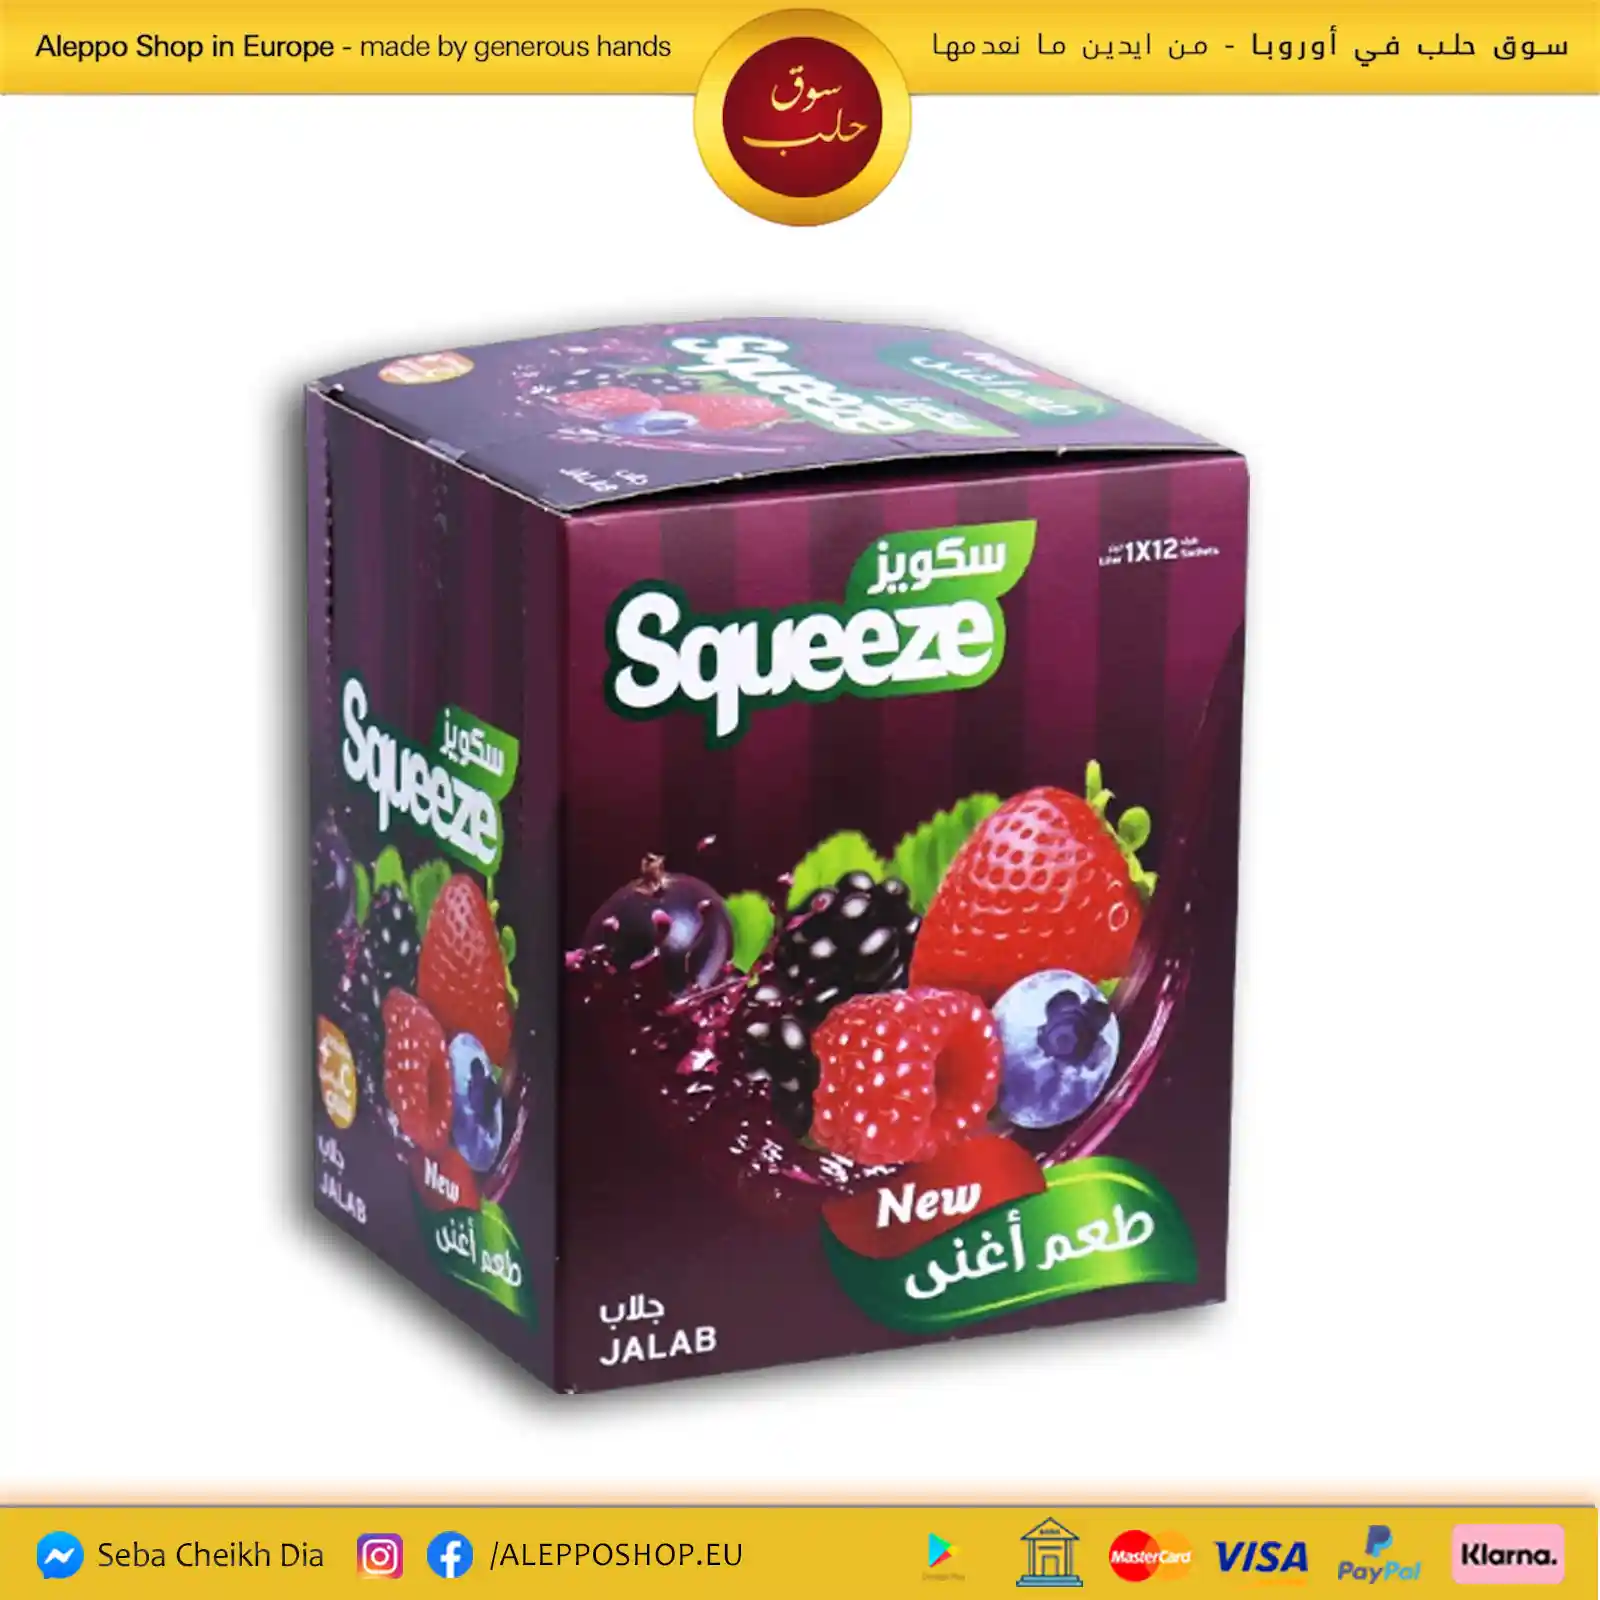 Squeeze Jalap (Packung)